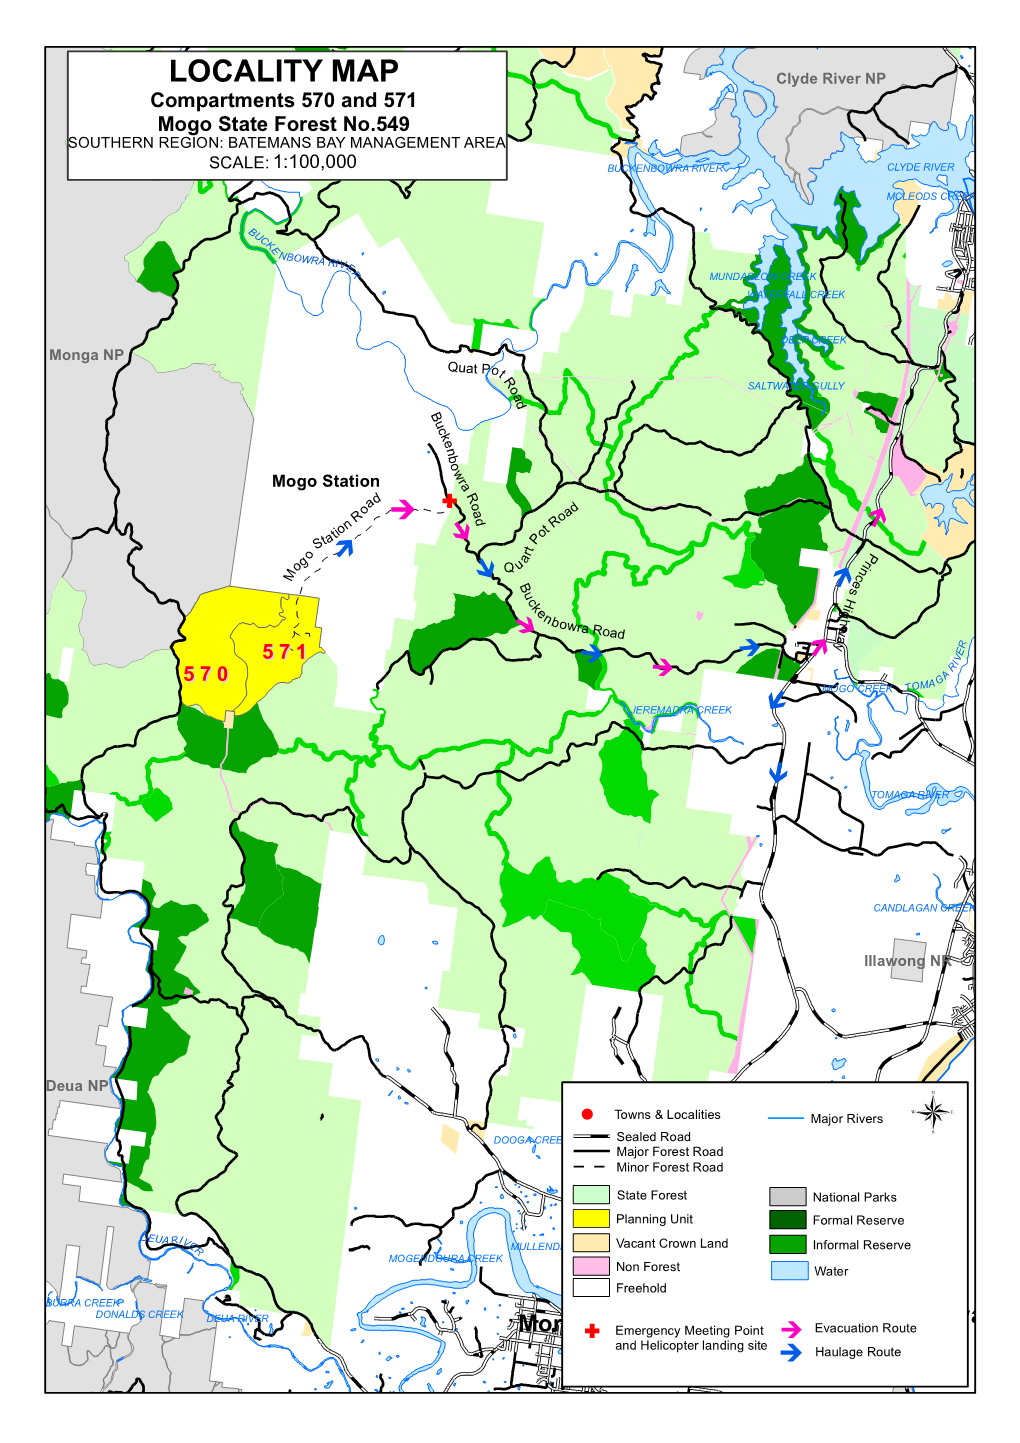 LOCALITY MAP Clyde River NP Compartments 570 and 571 Mogo State Forest No.549 SOUTHERN REGION: BATEMANS BAY MANAGEMENT AREA